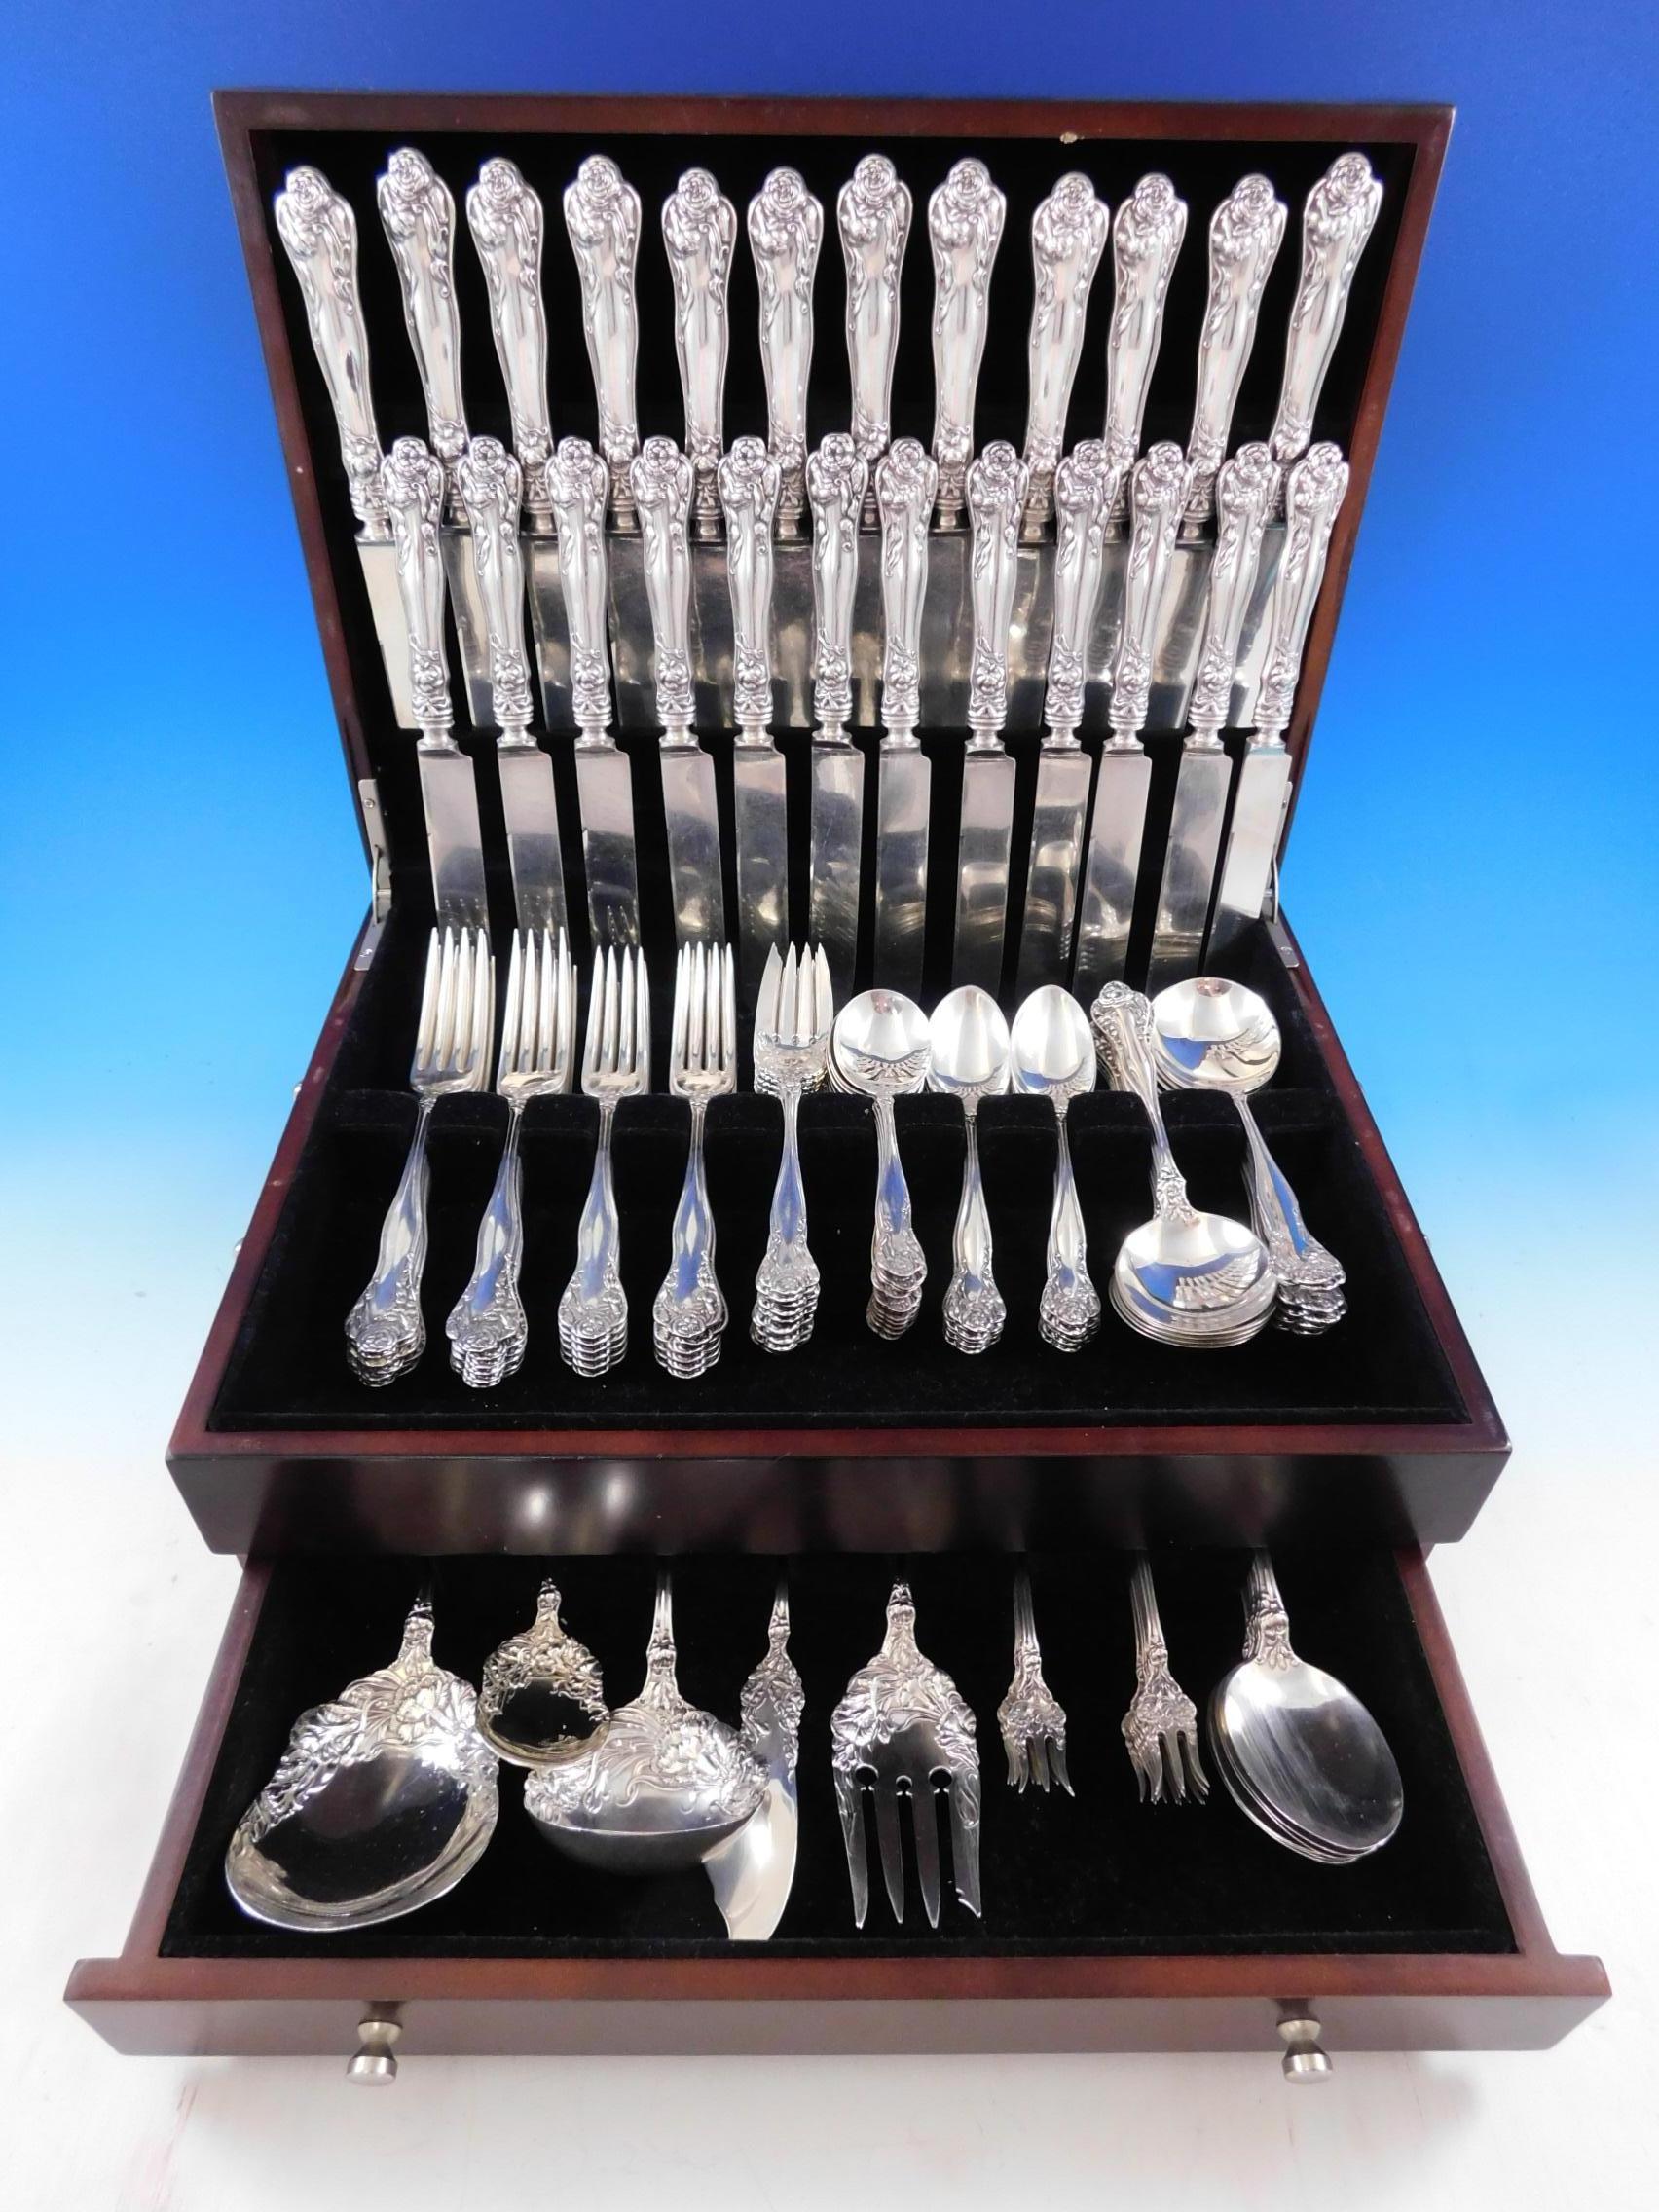 Rare stratford by International, circa 1902, sterling silver flatware set with Art Nouveau carnation motif, 108 pieces. This set includes:

12 dinner knives w/blunt plated blades, 9 3/4